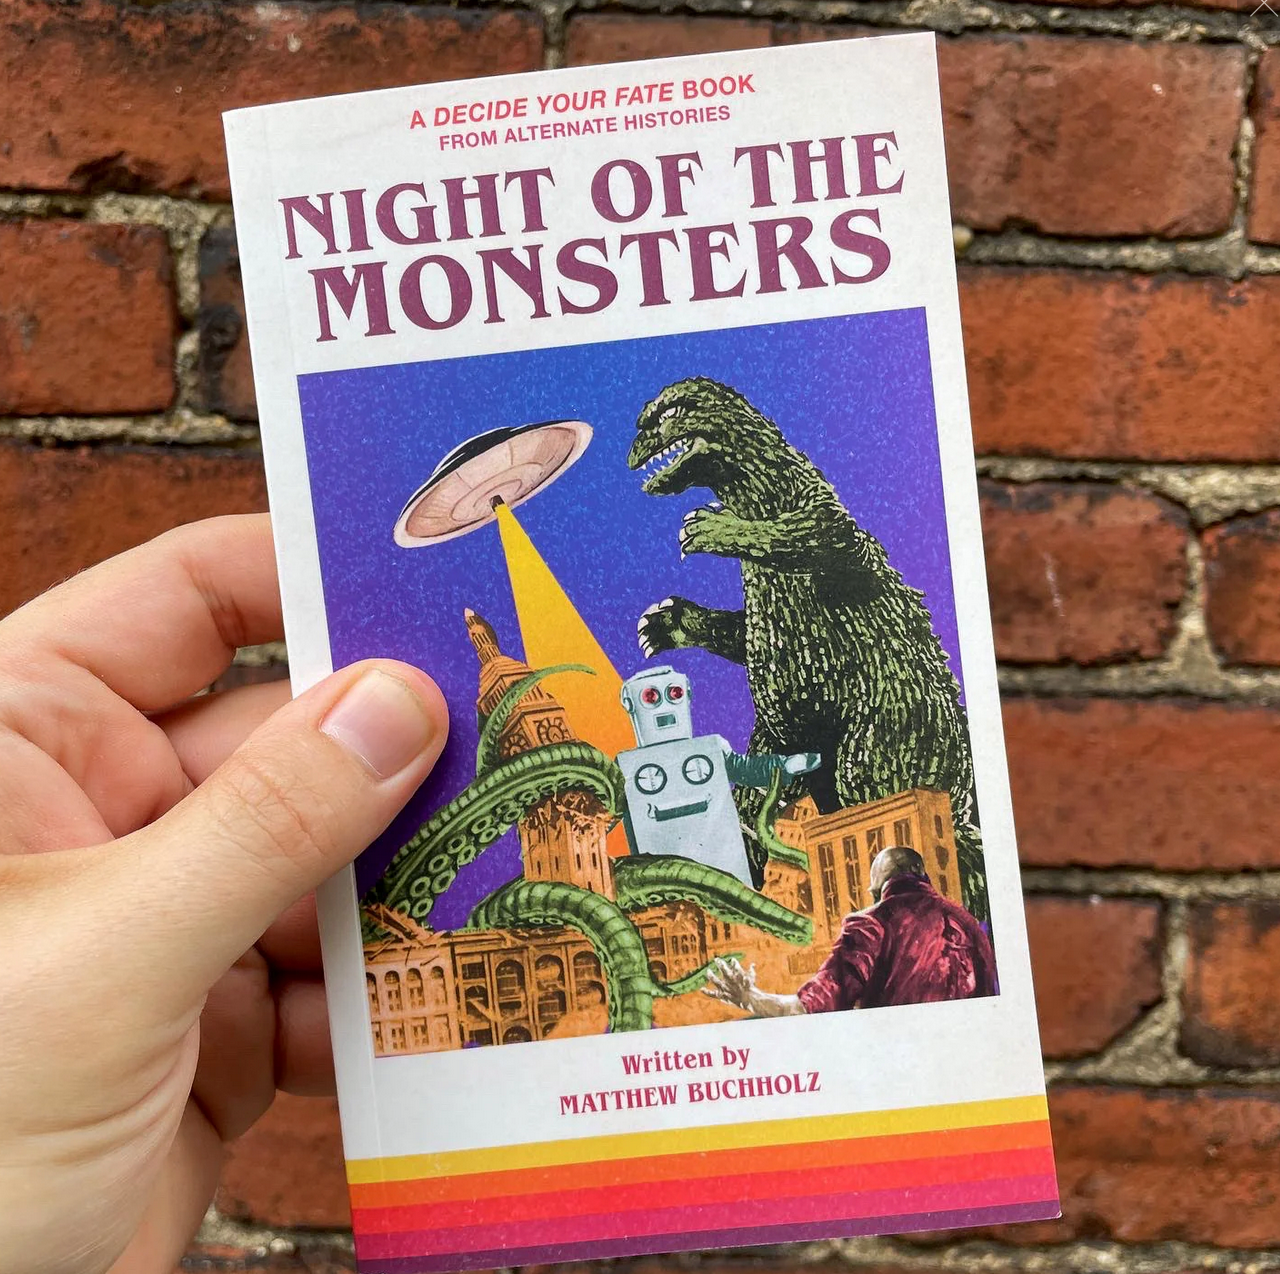 Night of the Monsters - Decide Your Fate Book